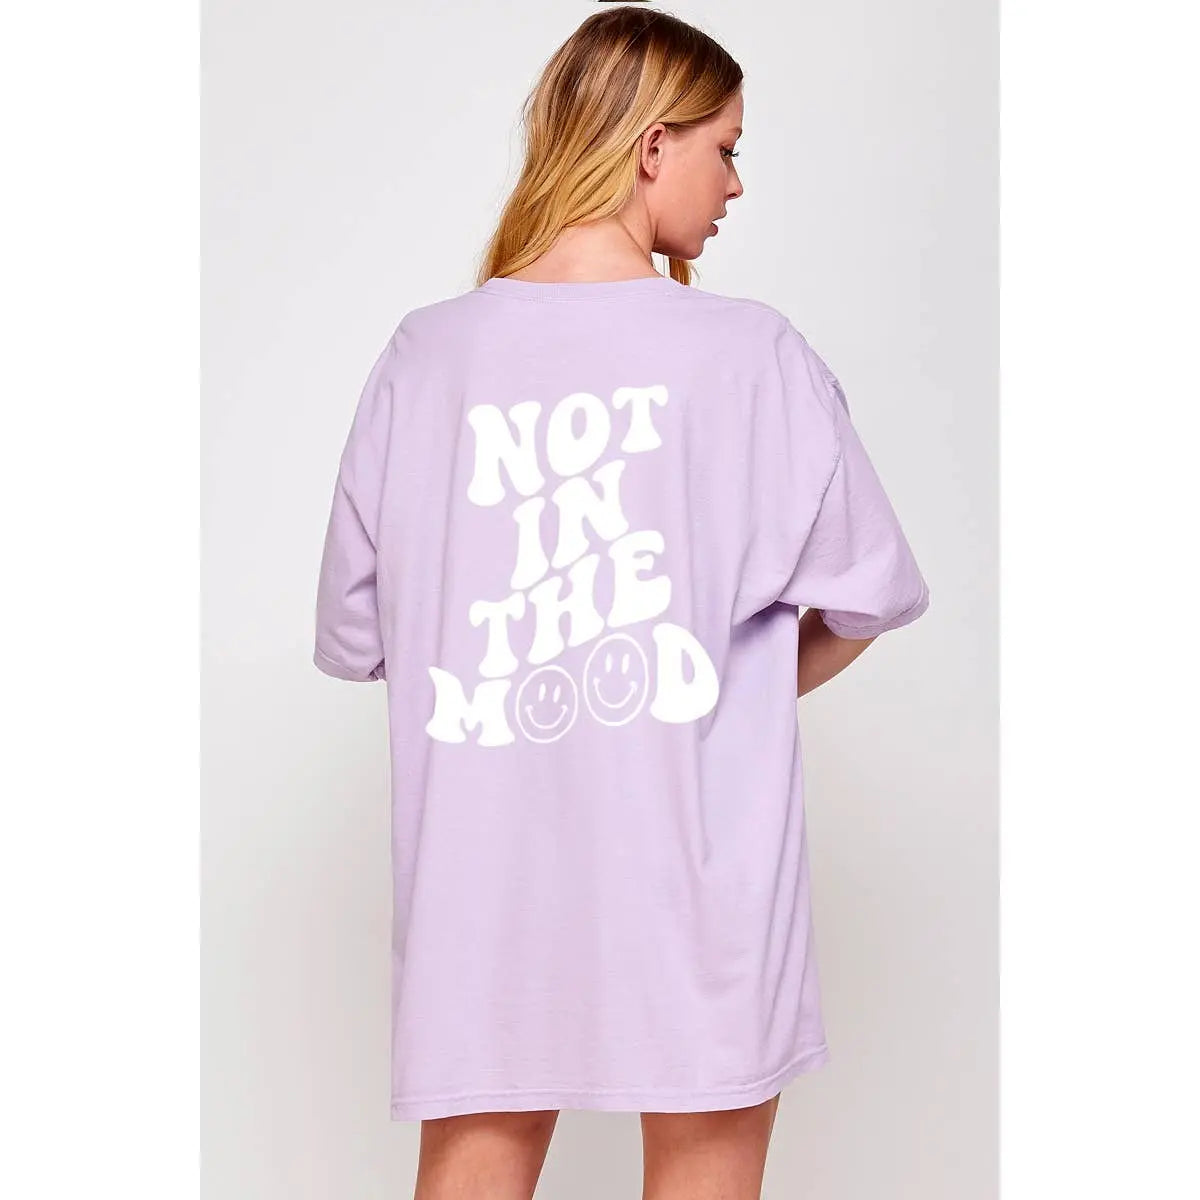 NOT IN THE MOOD VINTAGE  GRAPHIC TEE Illustrated Society